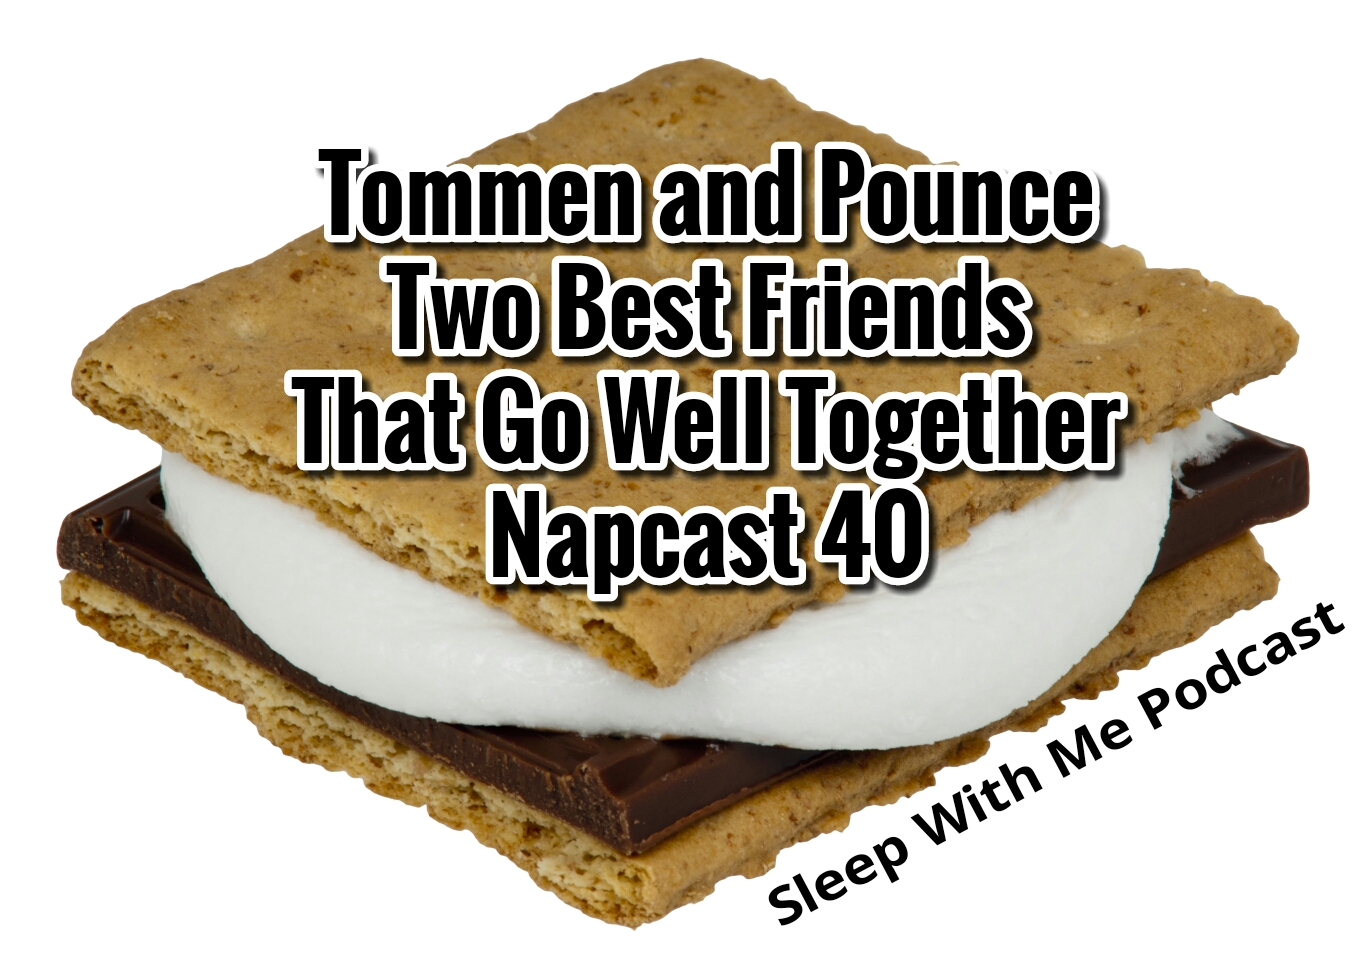 “Two Best Friends That Go Great Together” Napcast 40 | Tommen, Pounce and the gods from GoT hlep you sleep